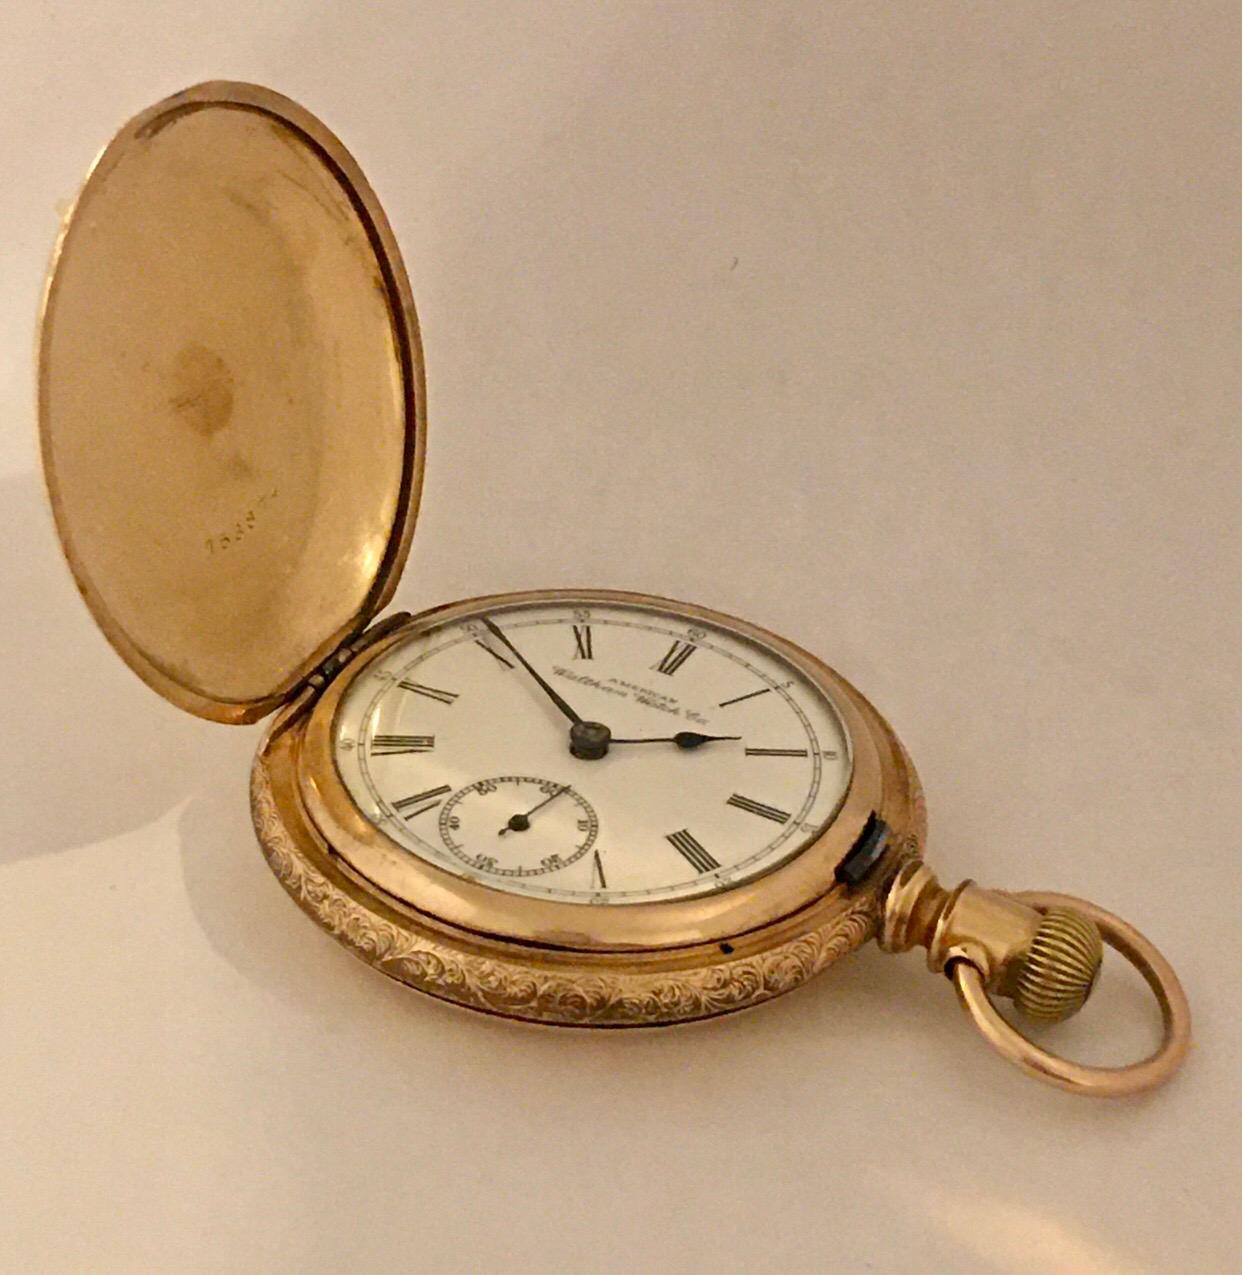 14K Gold-Filled Full Hunter American Waltham Watch Co.Antique Gents Pocket Watch 11